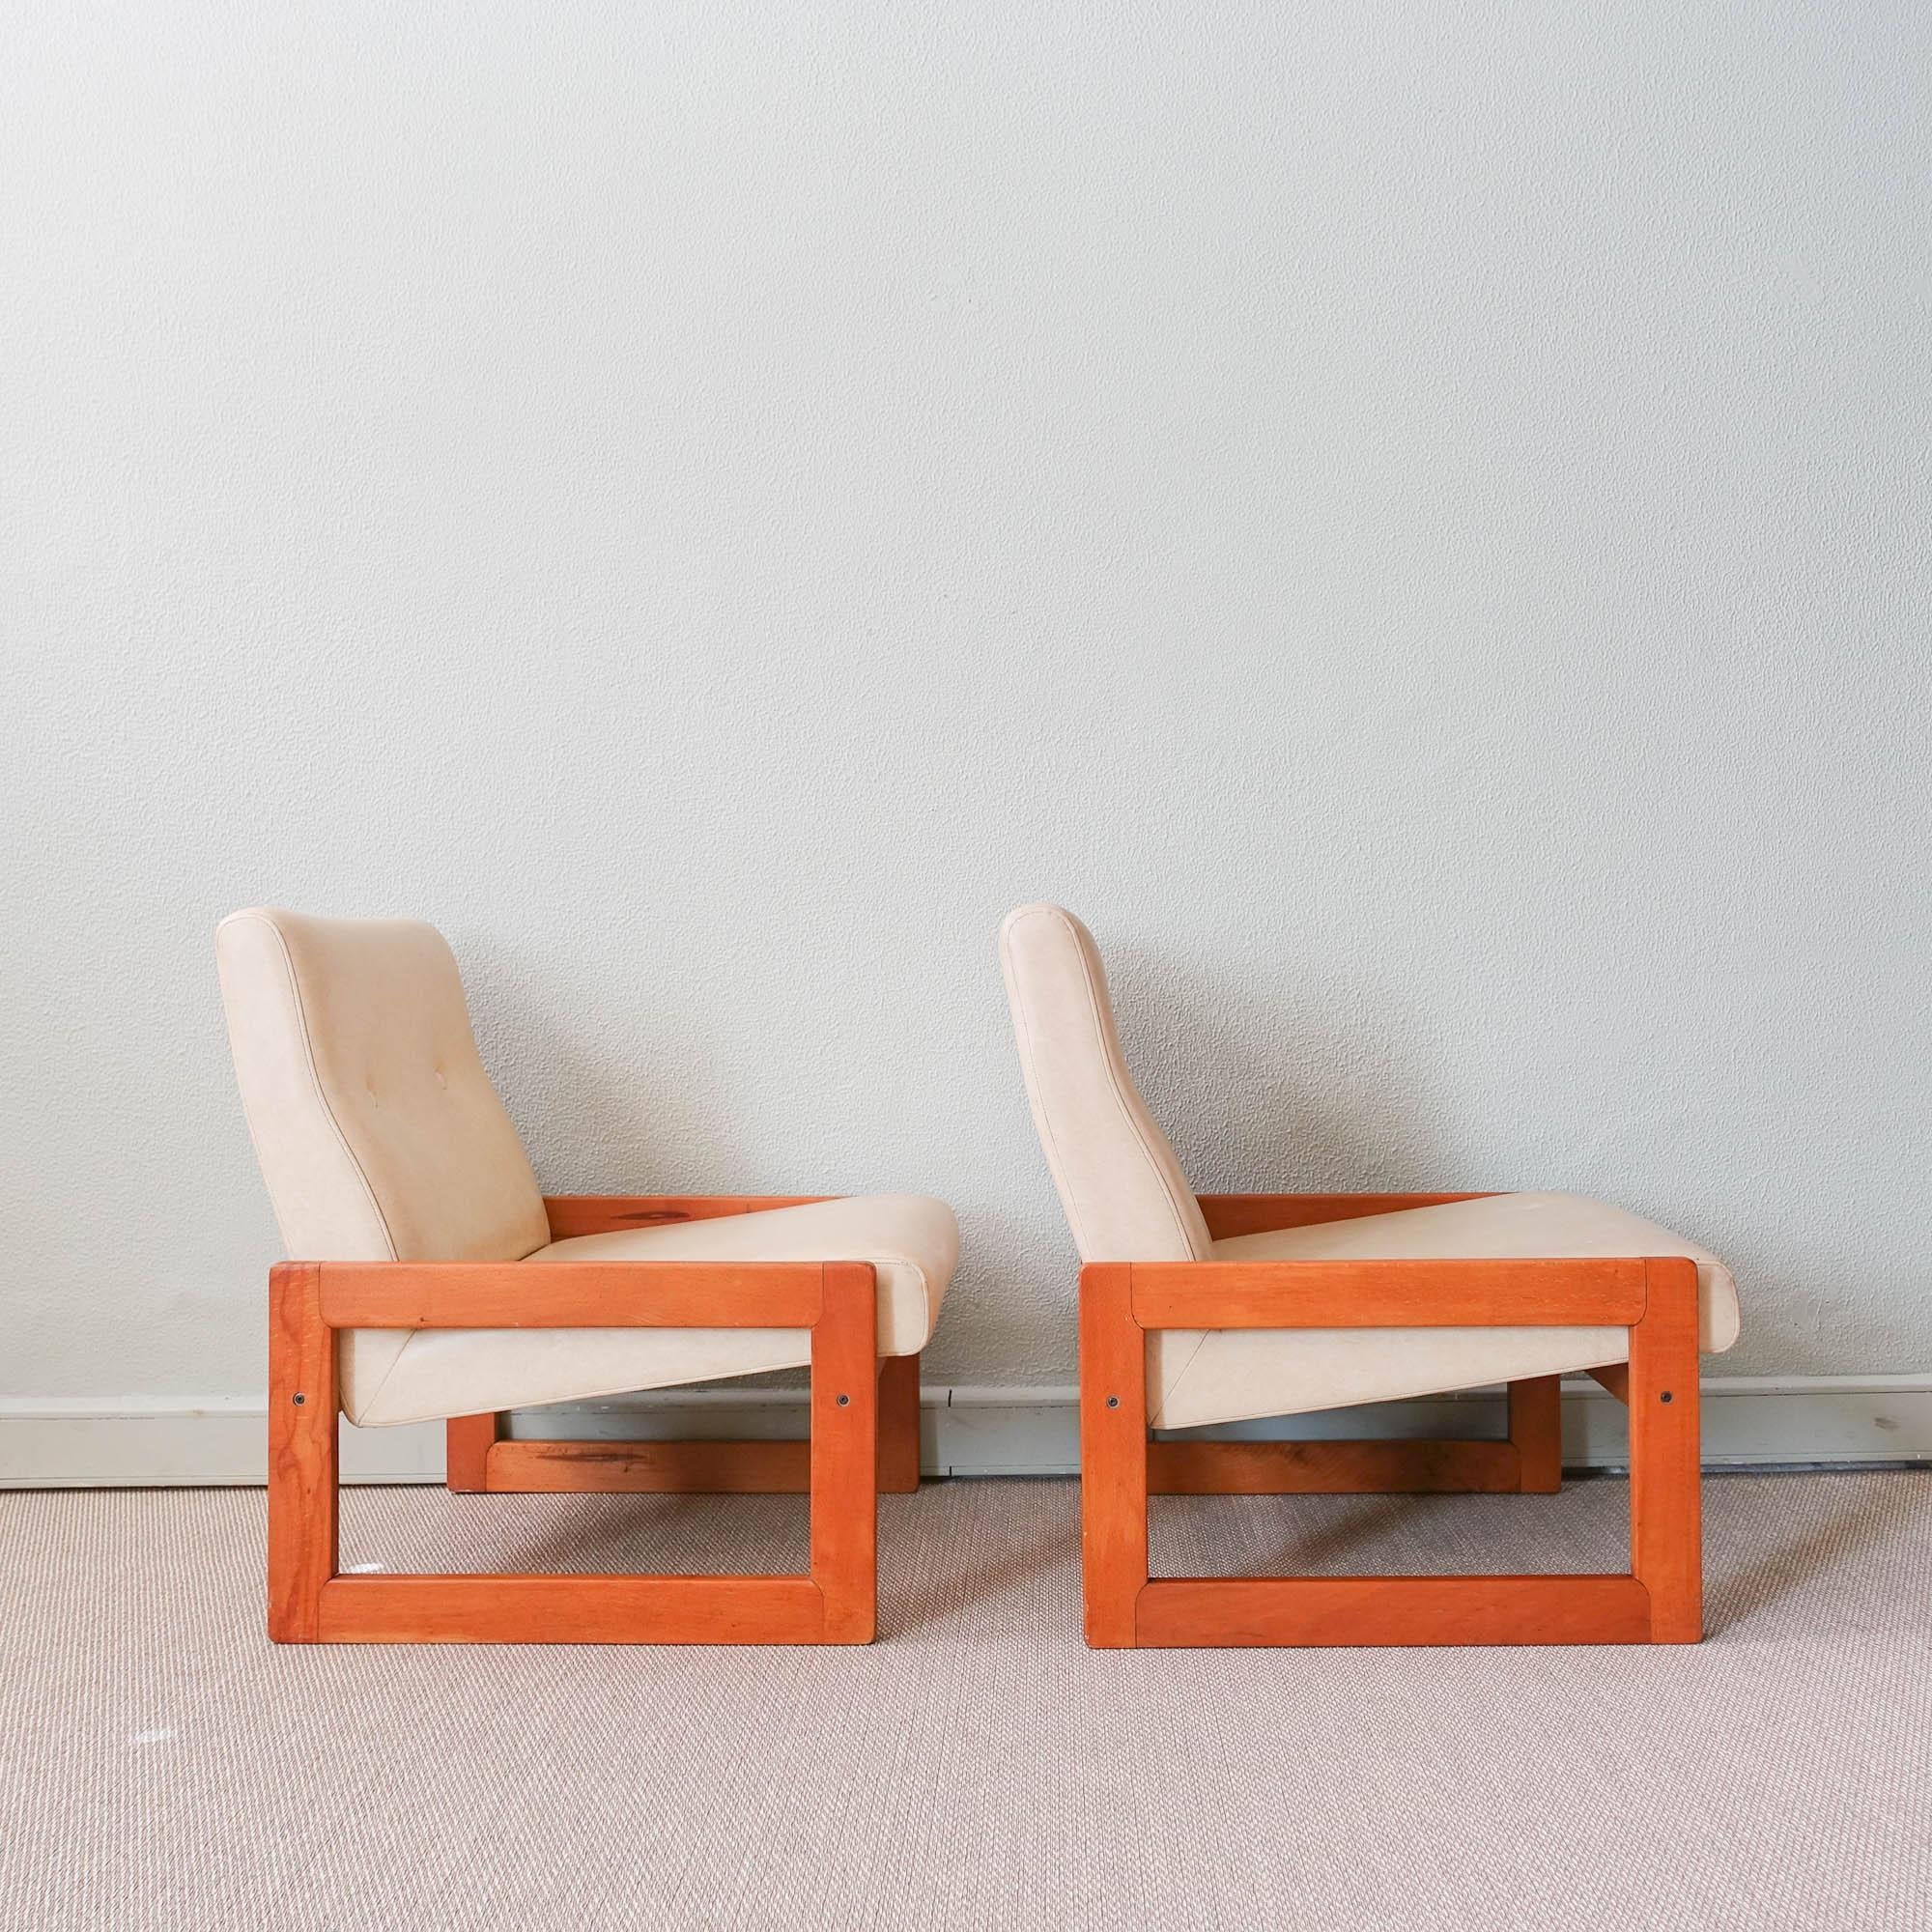 Faux Leather Pair of Easy Chairs, Model Espinho, by José Espinho for Olaio, 1973 For Sale